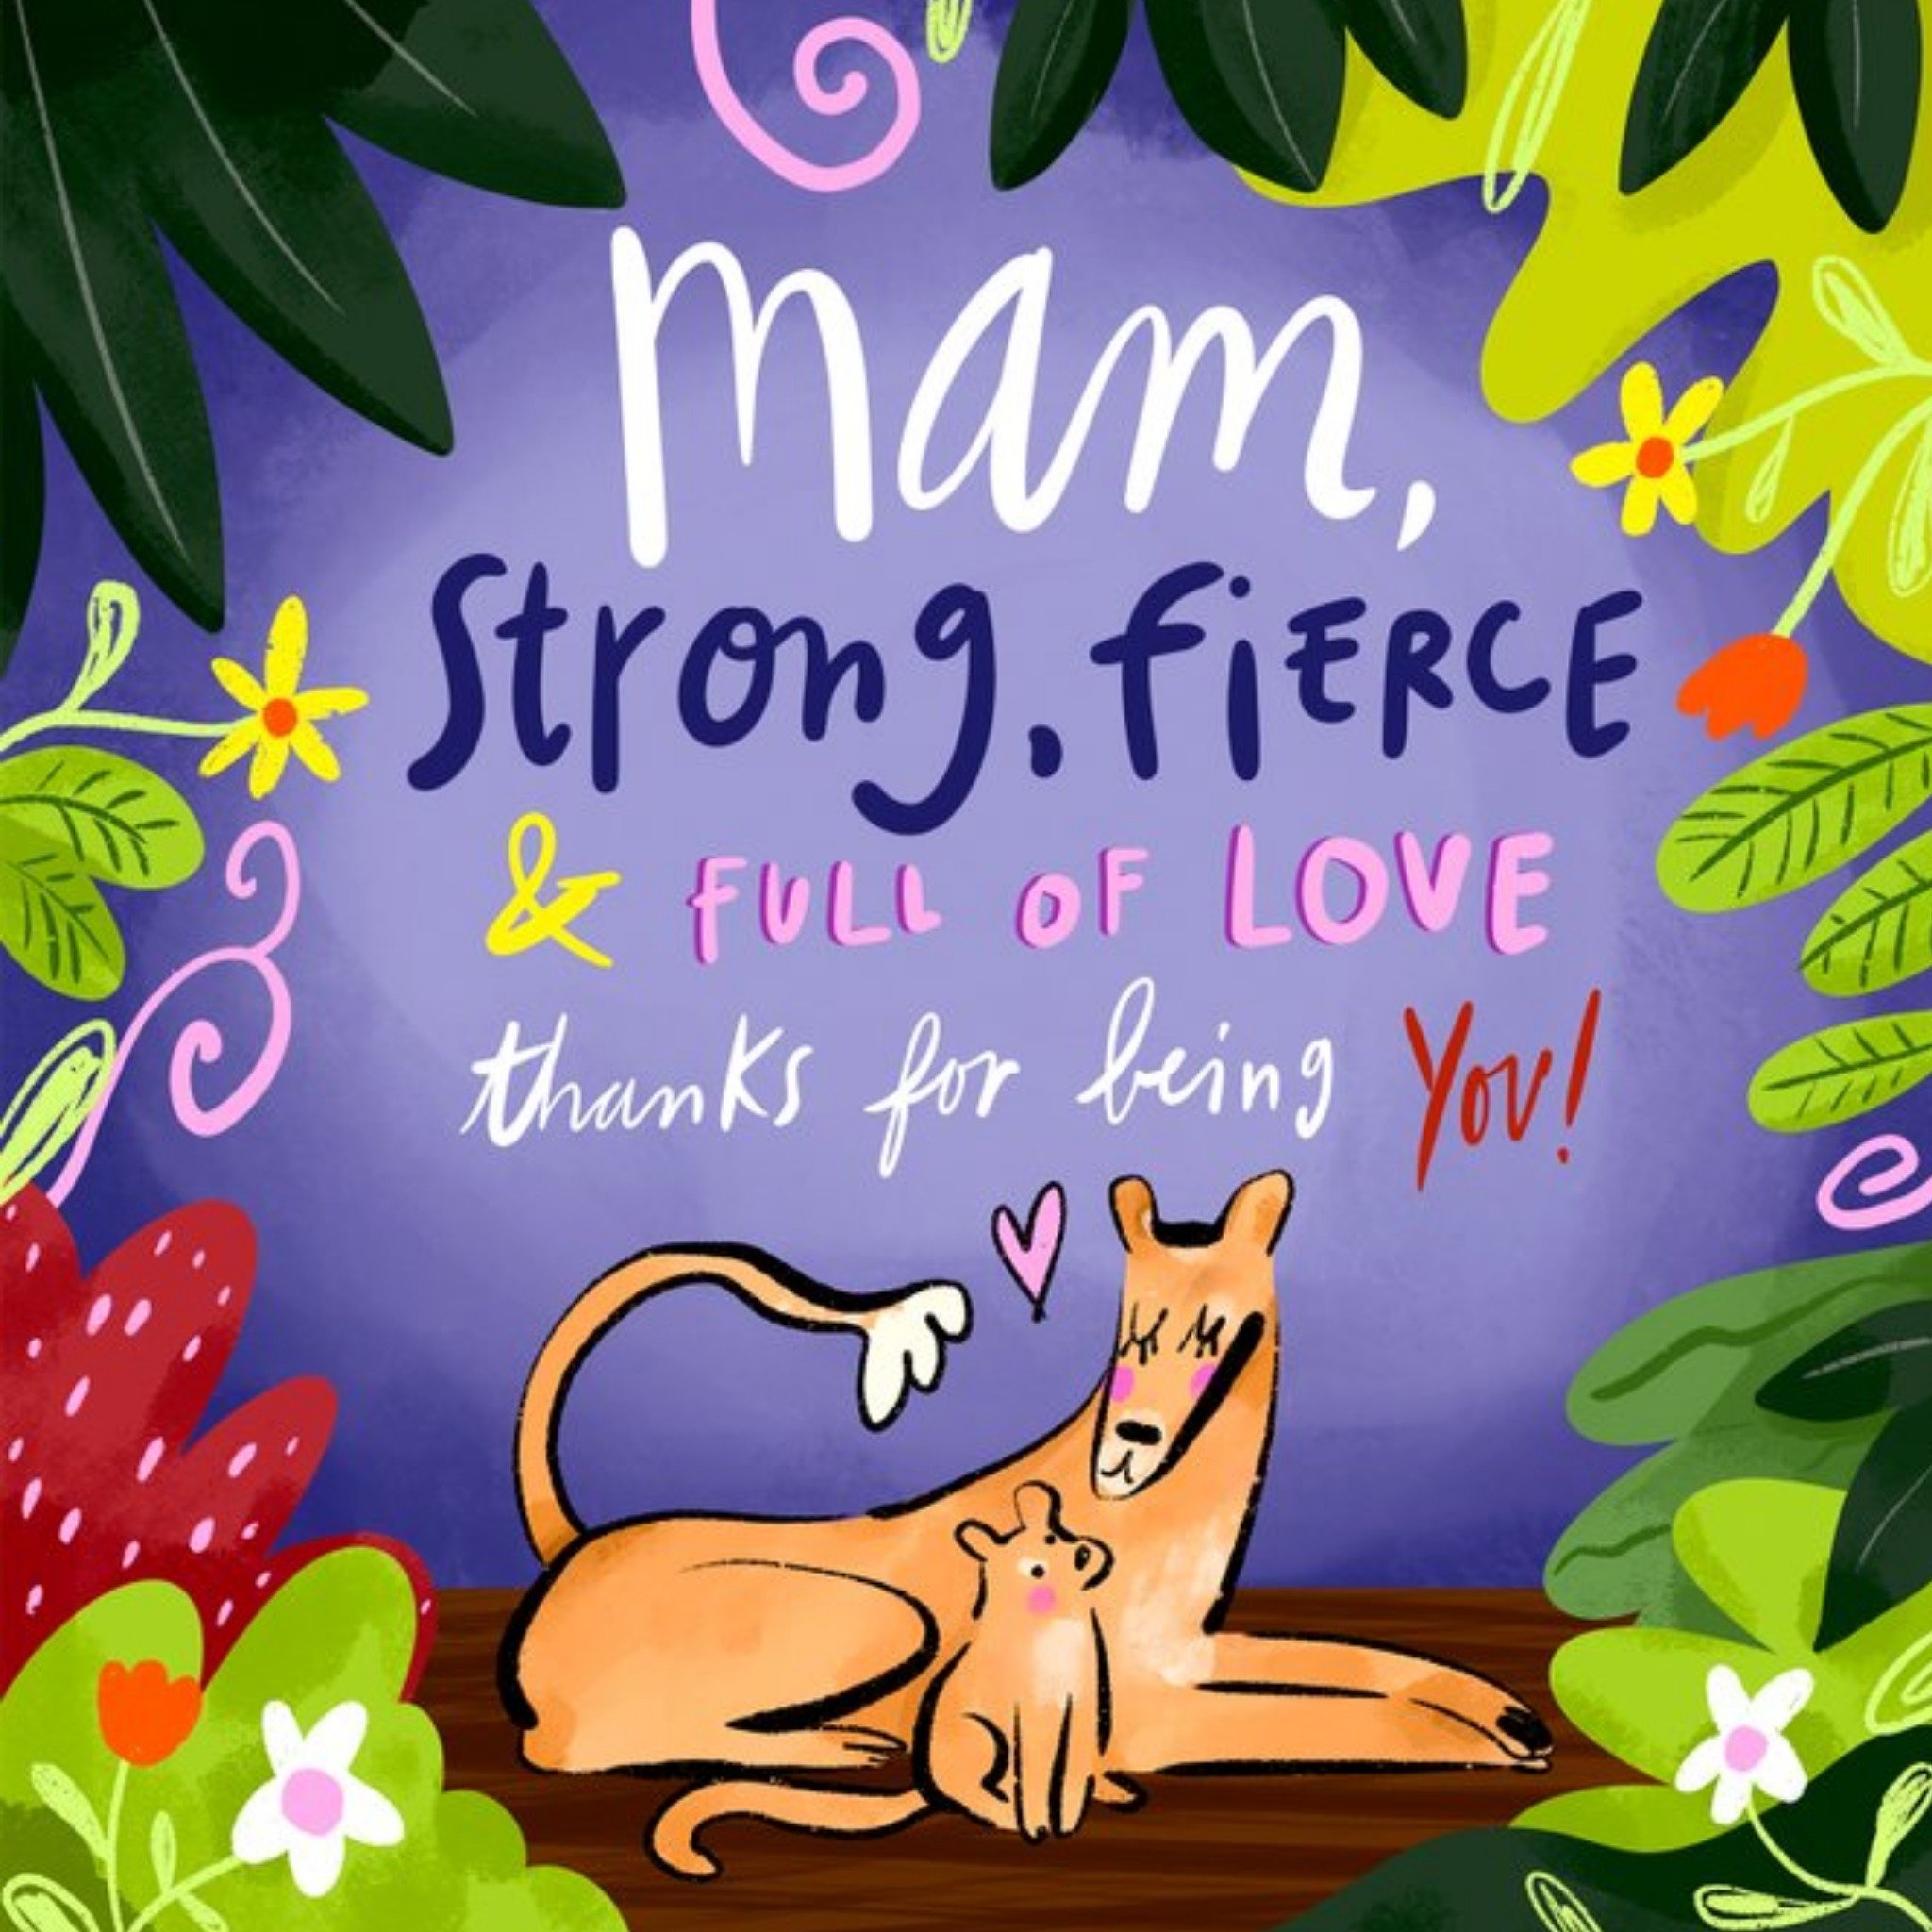 Moonpig Illustration Of A Lion And Her Cub Surrounded By Vibrant Jungle Foliage Mothers Day Card, Sq